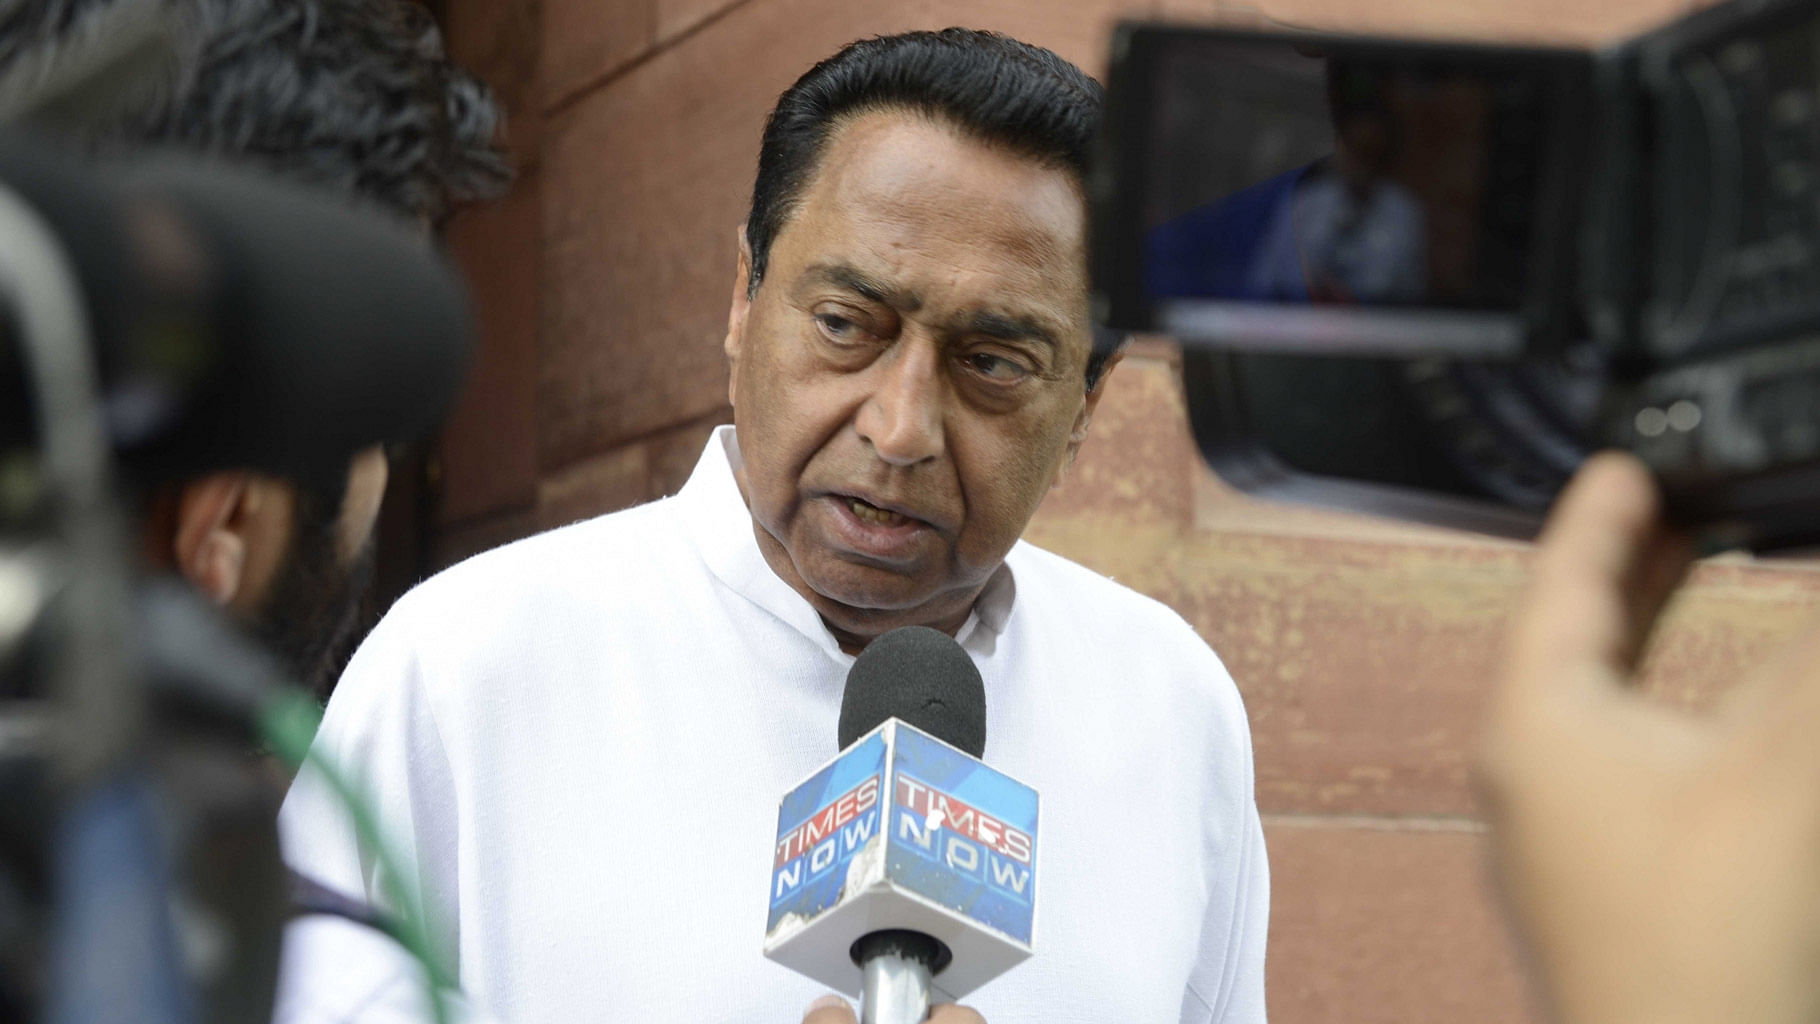 According to sources, Rs 9 crore has been found and around 50 places linked to close aides of MP Chief Minister Kamal Nath